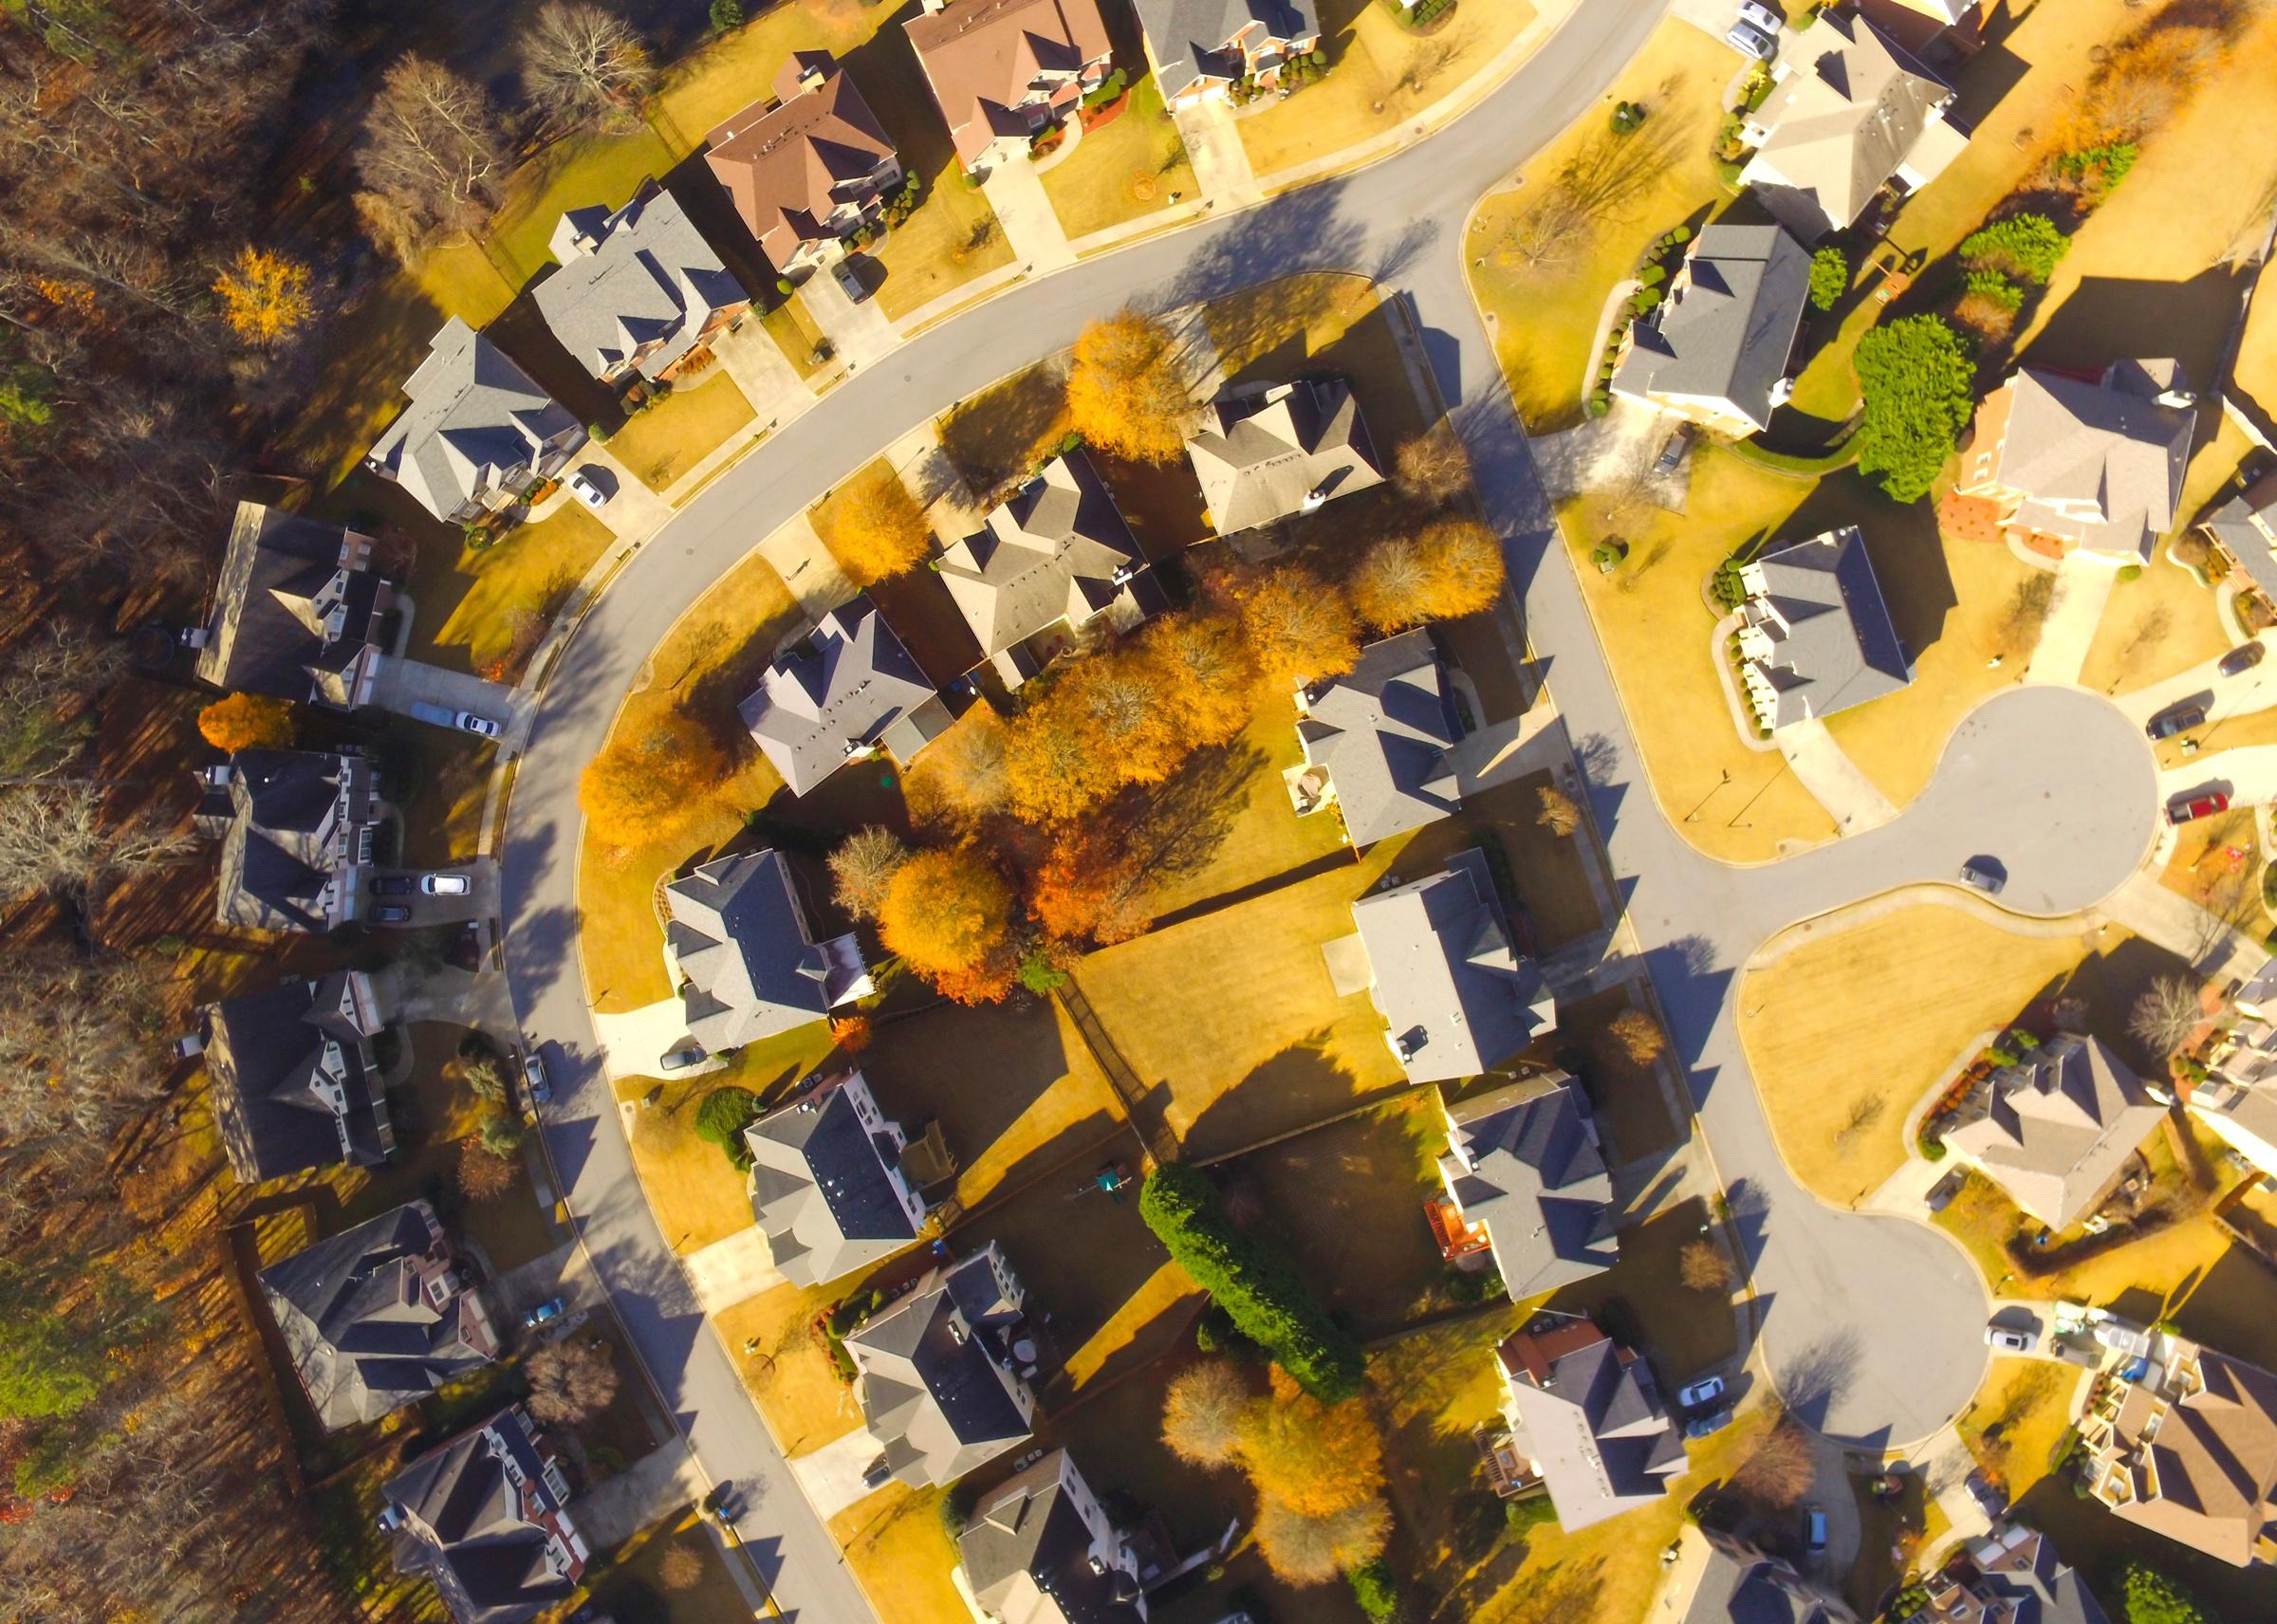 An aerial view of homes in Fall.